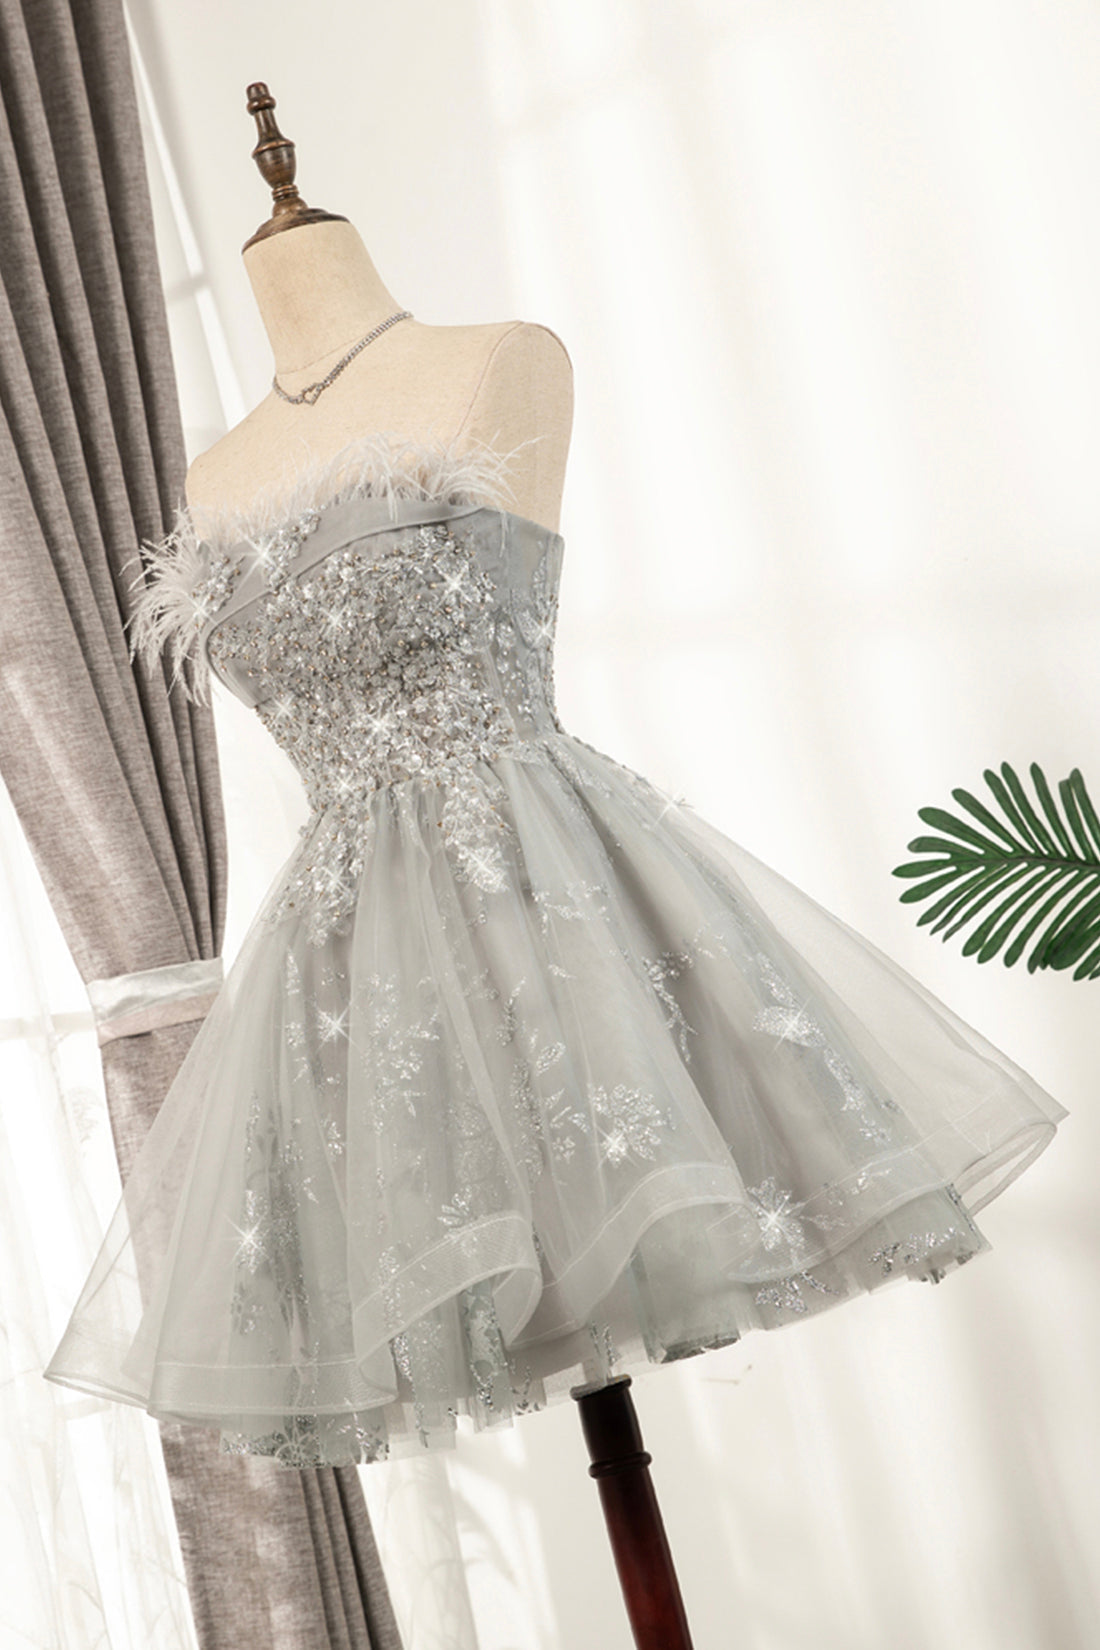 Bridesmaid Dress Green, Gray Strapless Tulle Short Prom Dress with Sequins, Cute A-Line Party Dress